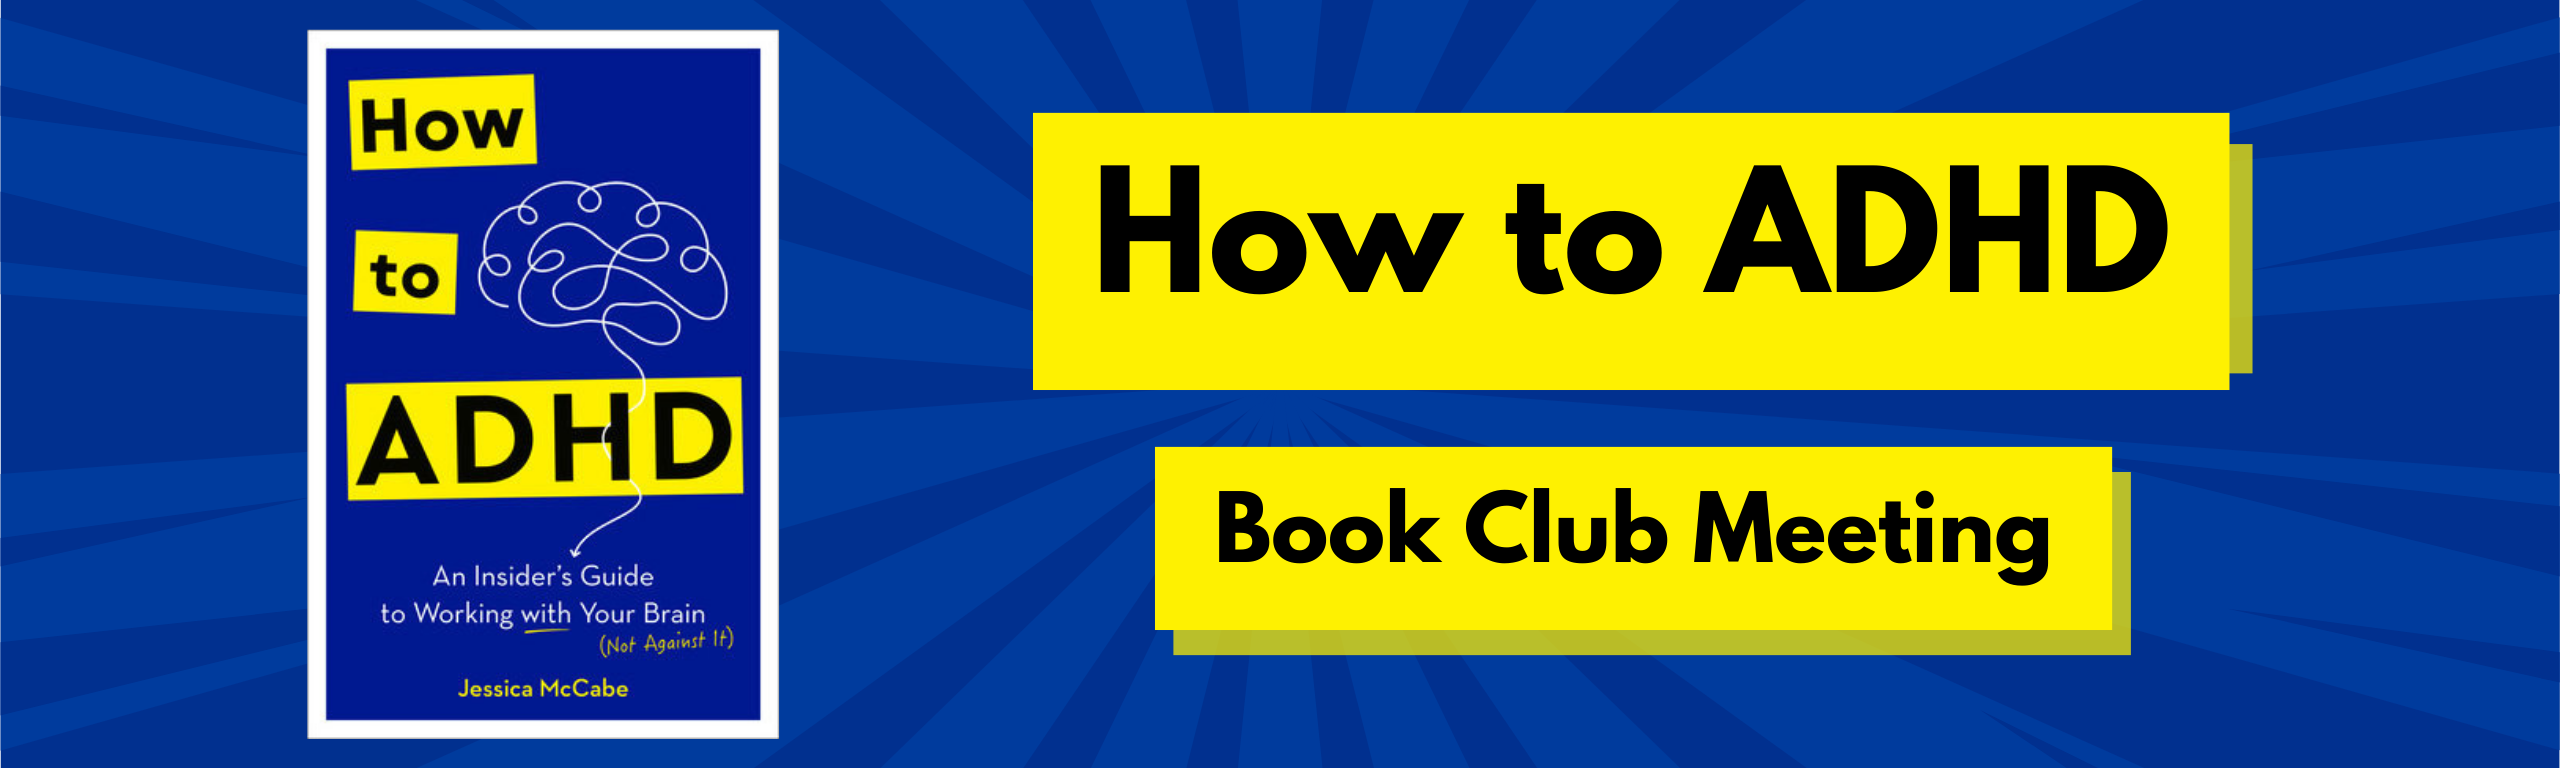 HOW TO ADHD Book Club Meeting